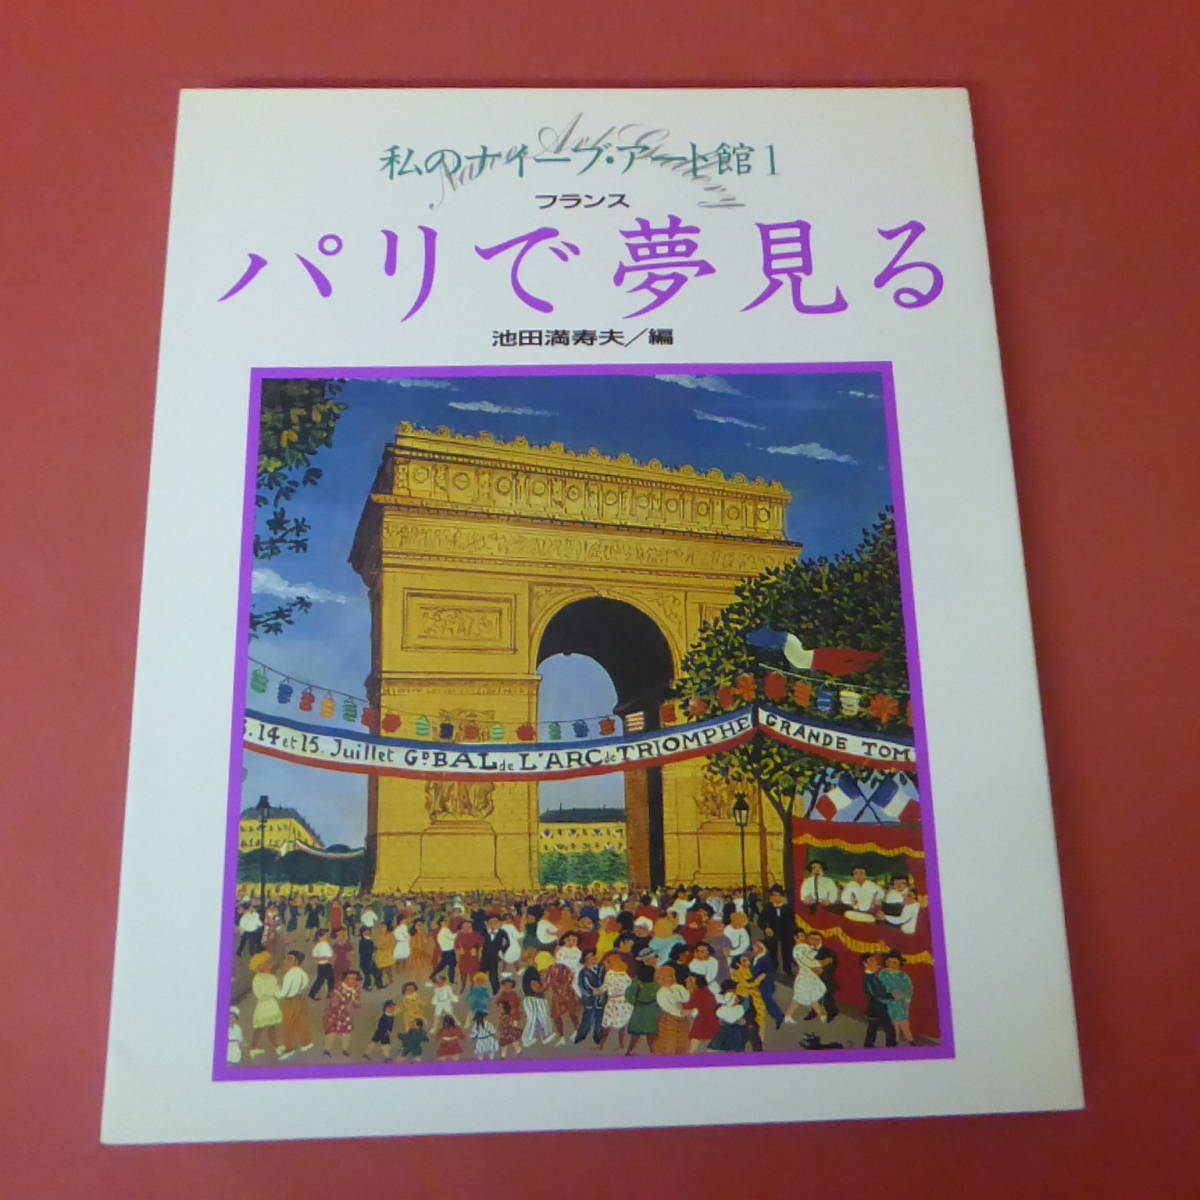 YN2-231208☆My Naive Art Museum 1 Dreaming in Paris France, Masuo Ikeda/Editor, Painting, Art Book, Collection, Art Book